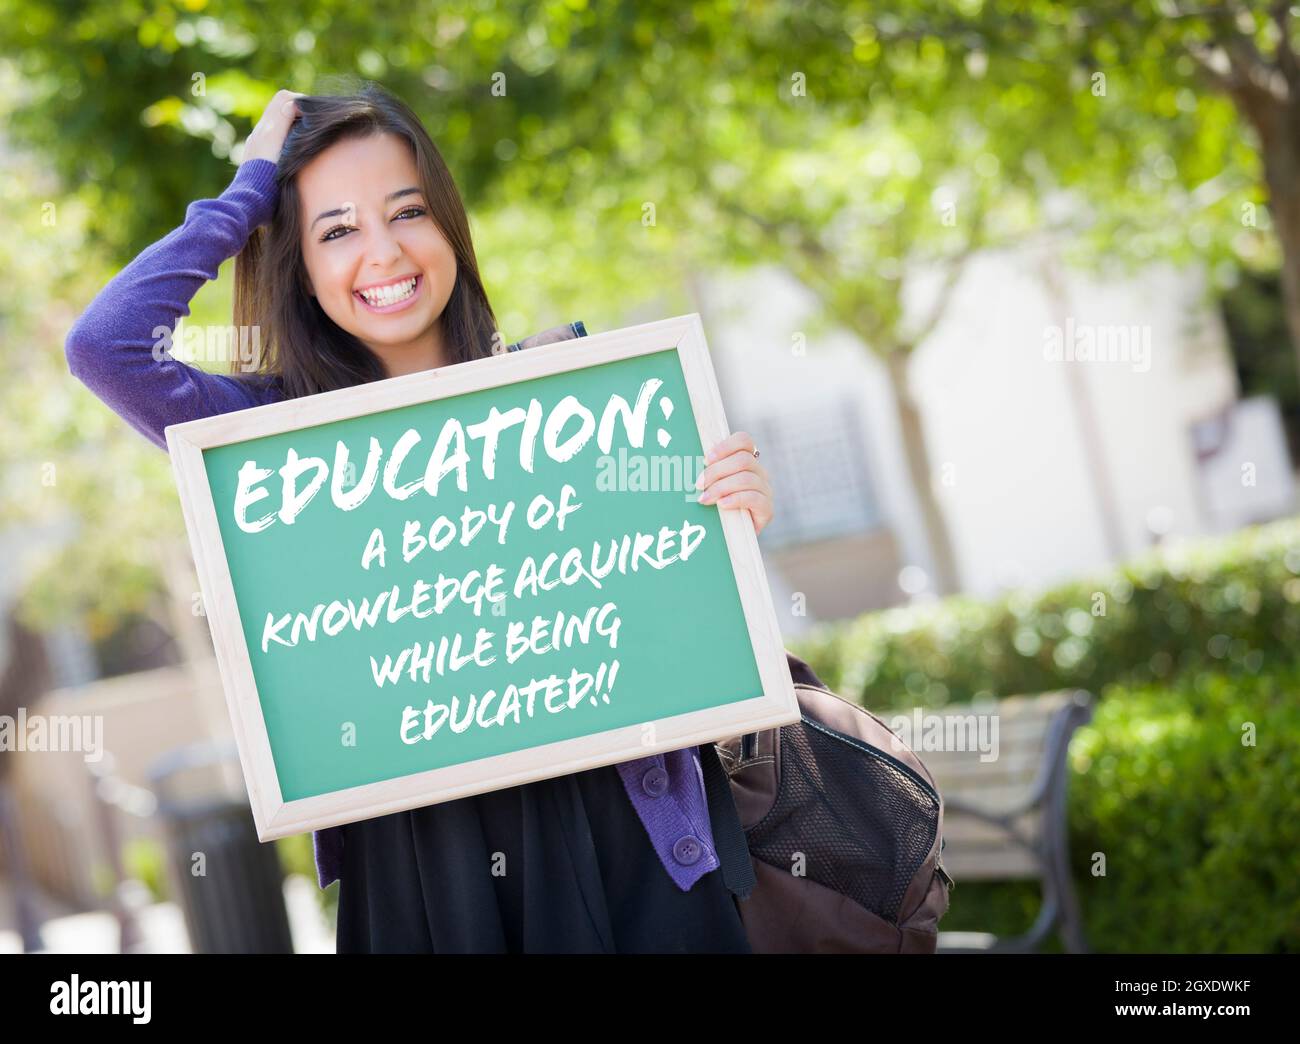 Excited Mixed Race Female Student Holding Chalkboard With Education and the Definition Written on it. Stock Photo